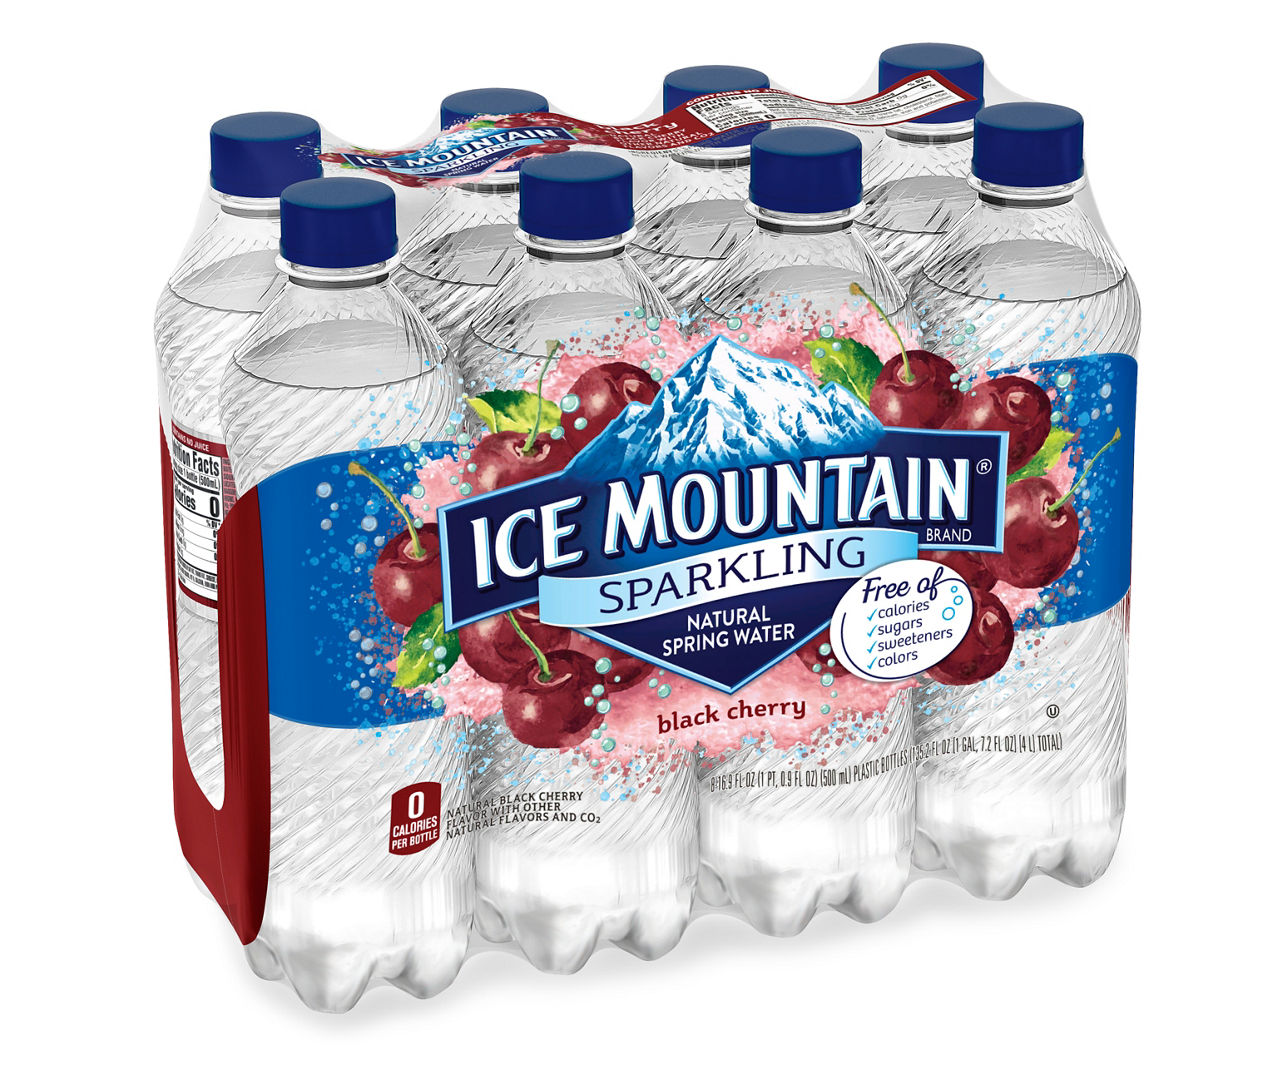 ICE MOUNTAIN Brand 100% Natural Spring Water, 20-ounce plastic bottle